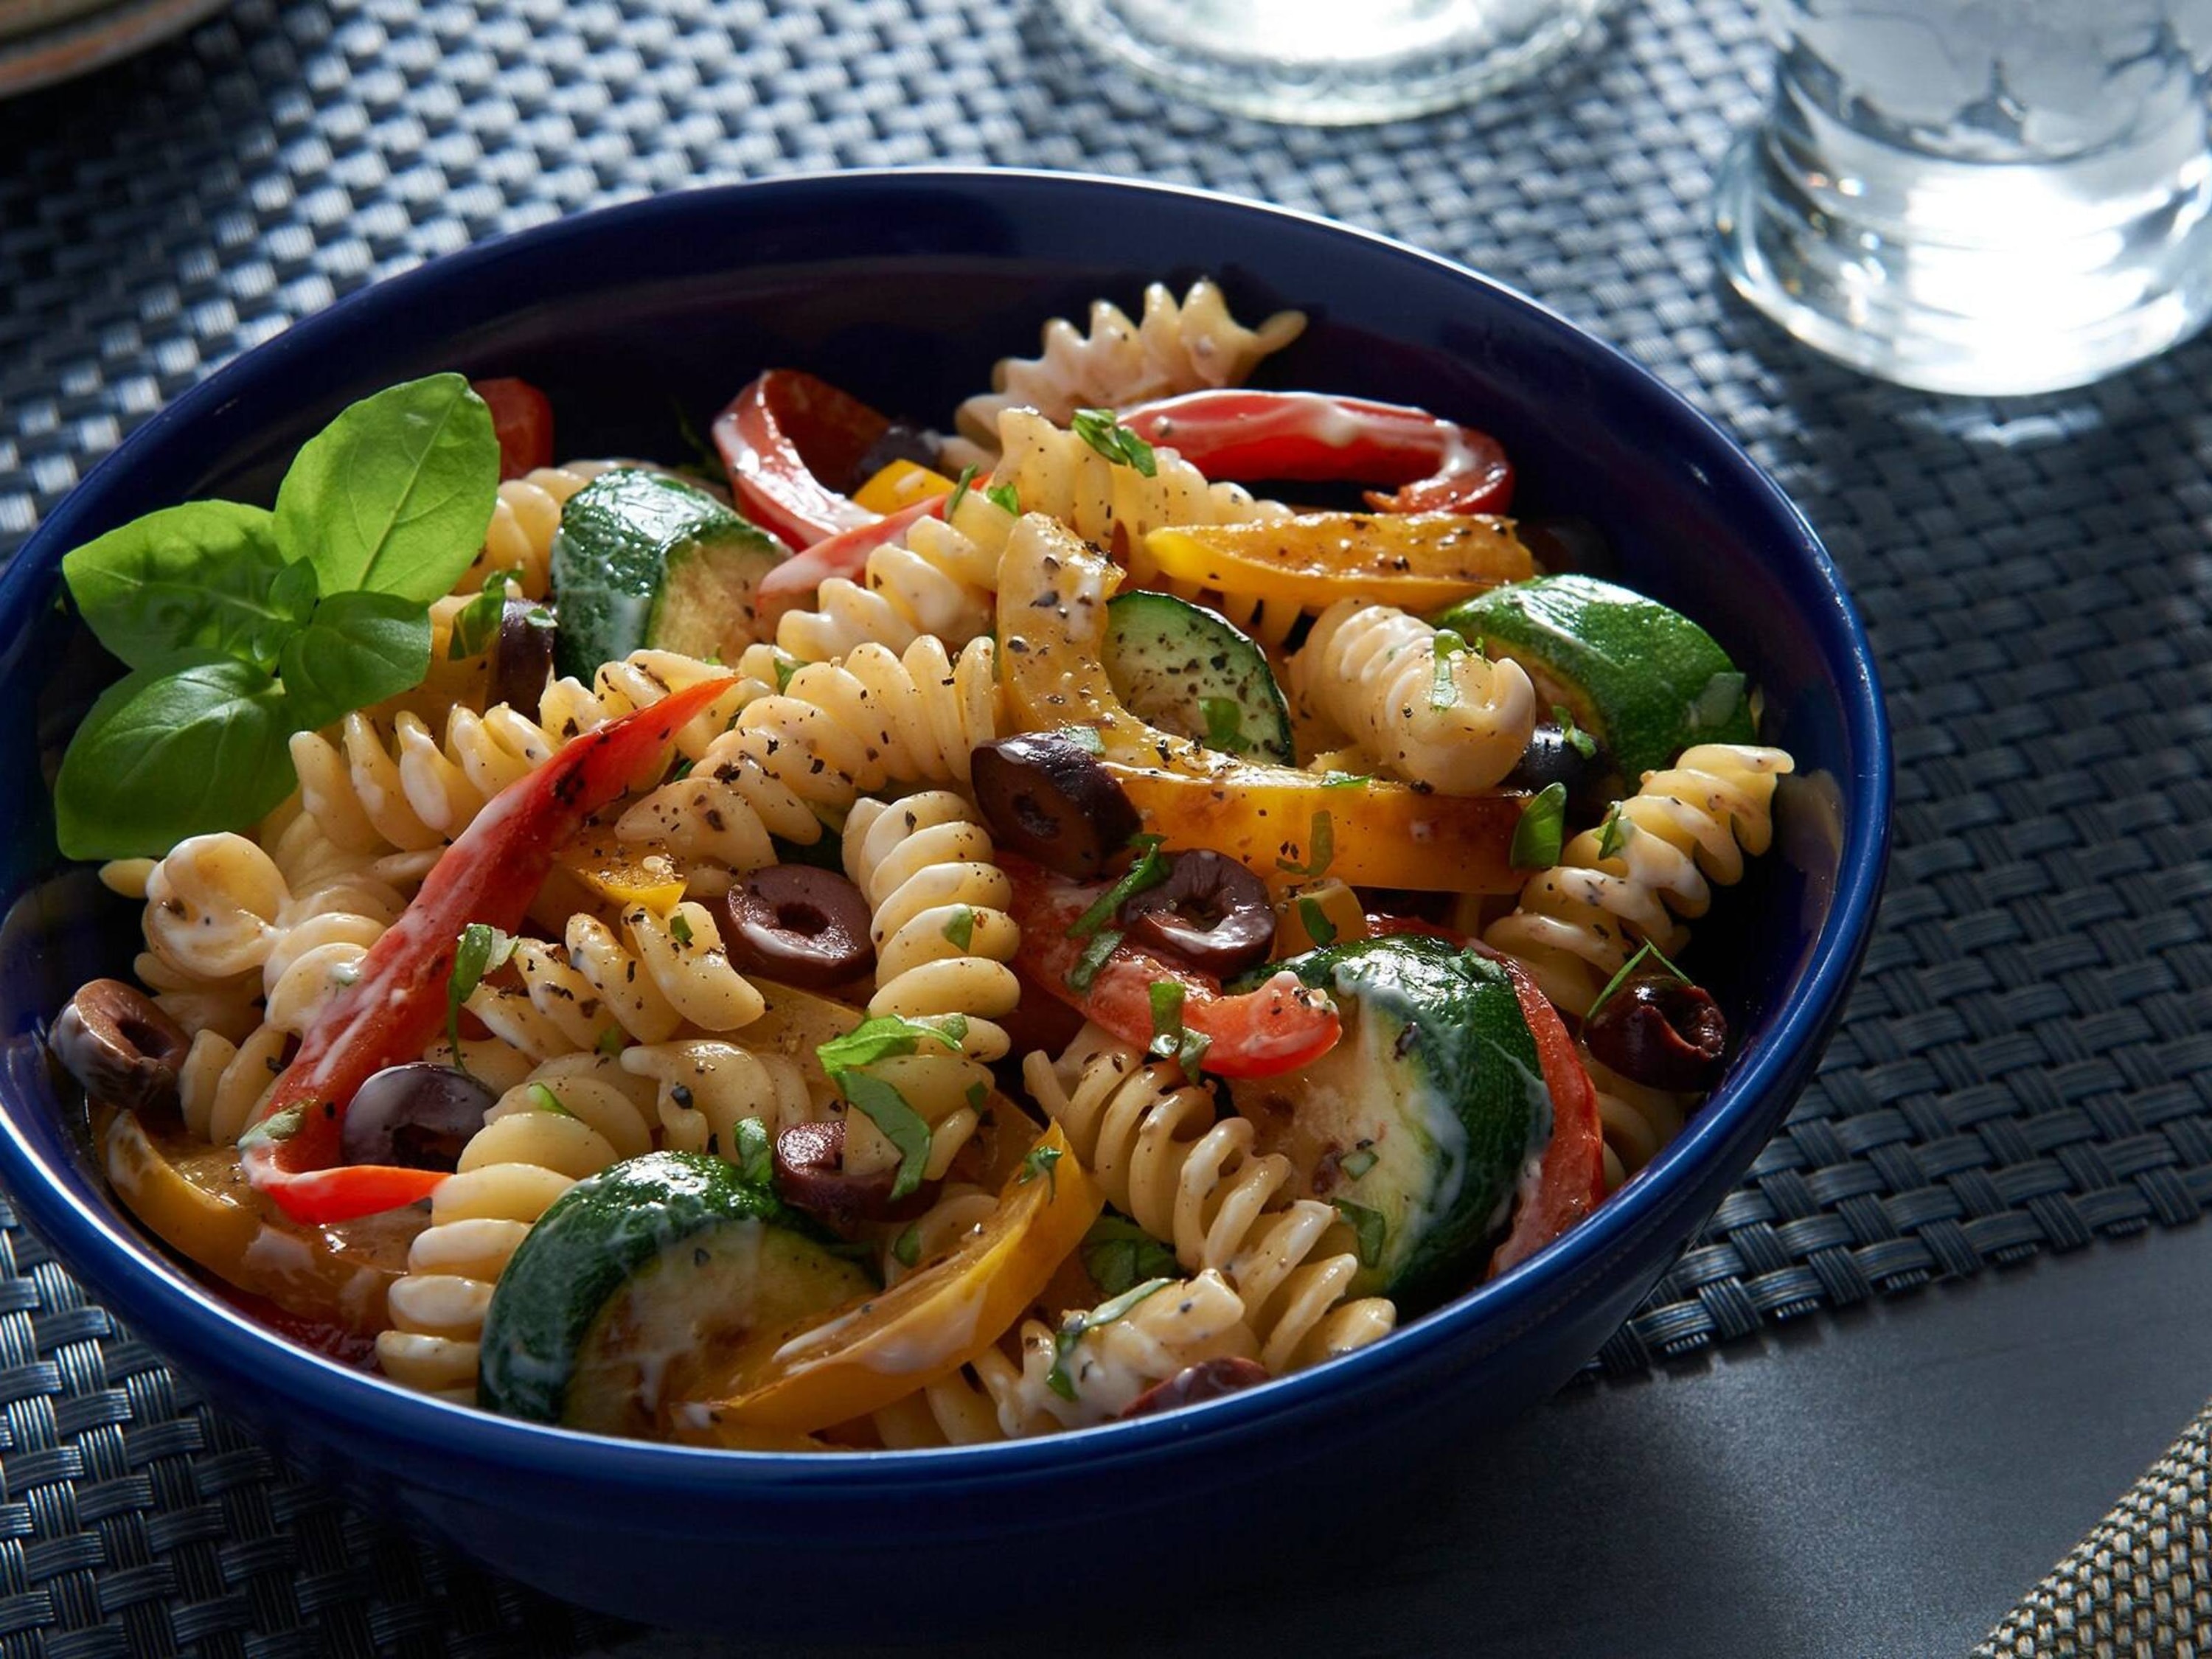 Pastasallad with vegetables